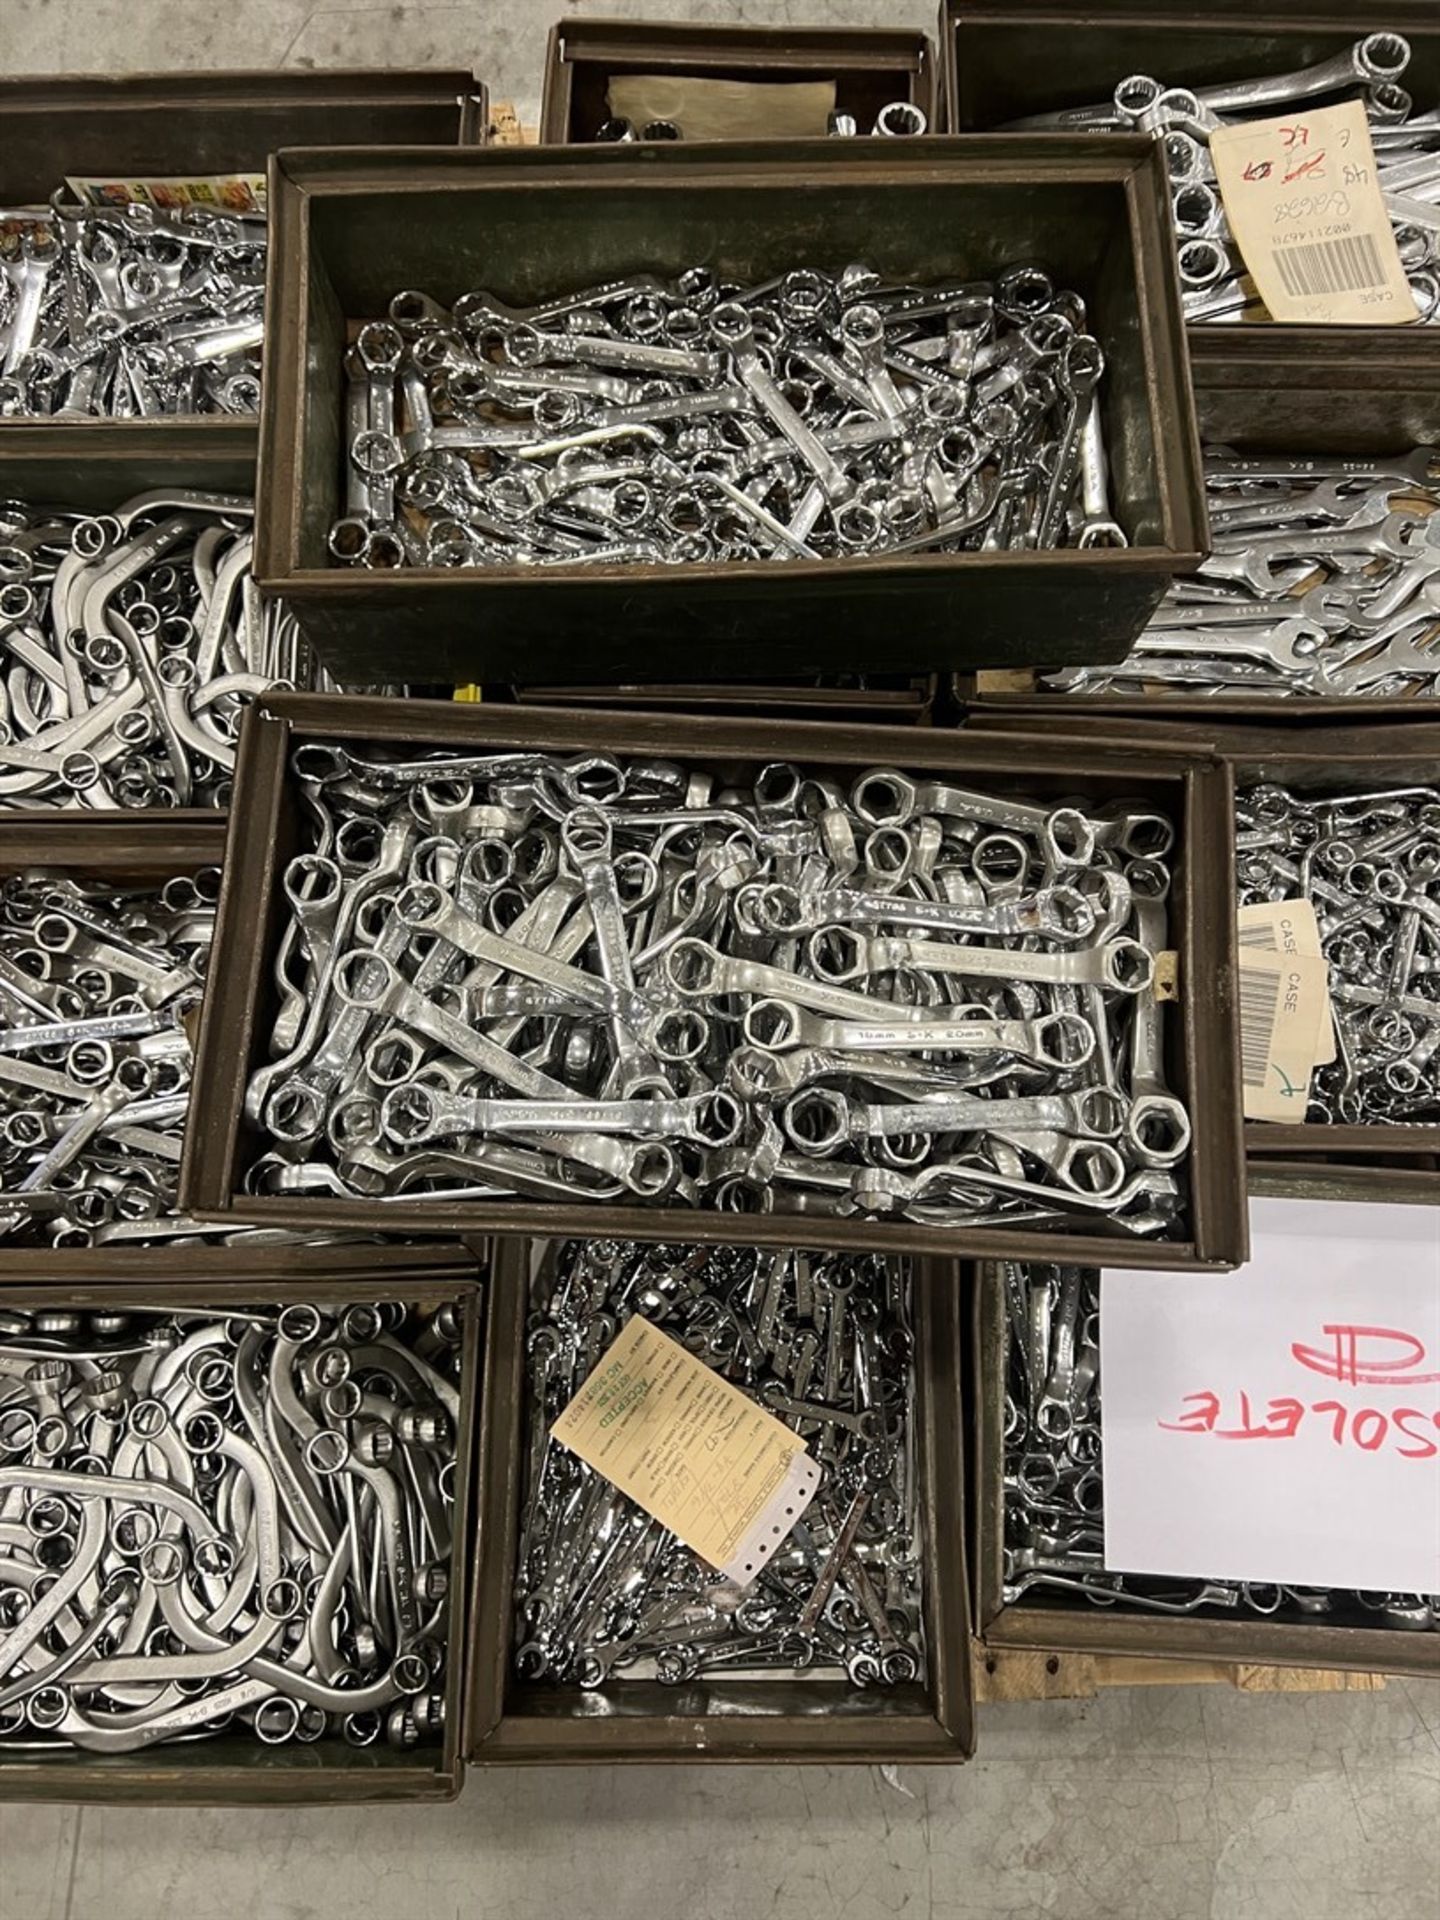 Pallet of Assorted Wrenches - Image 3 of 5